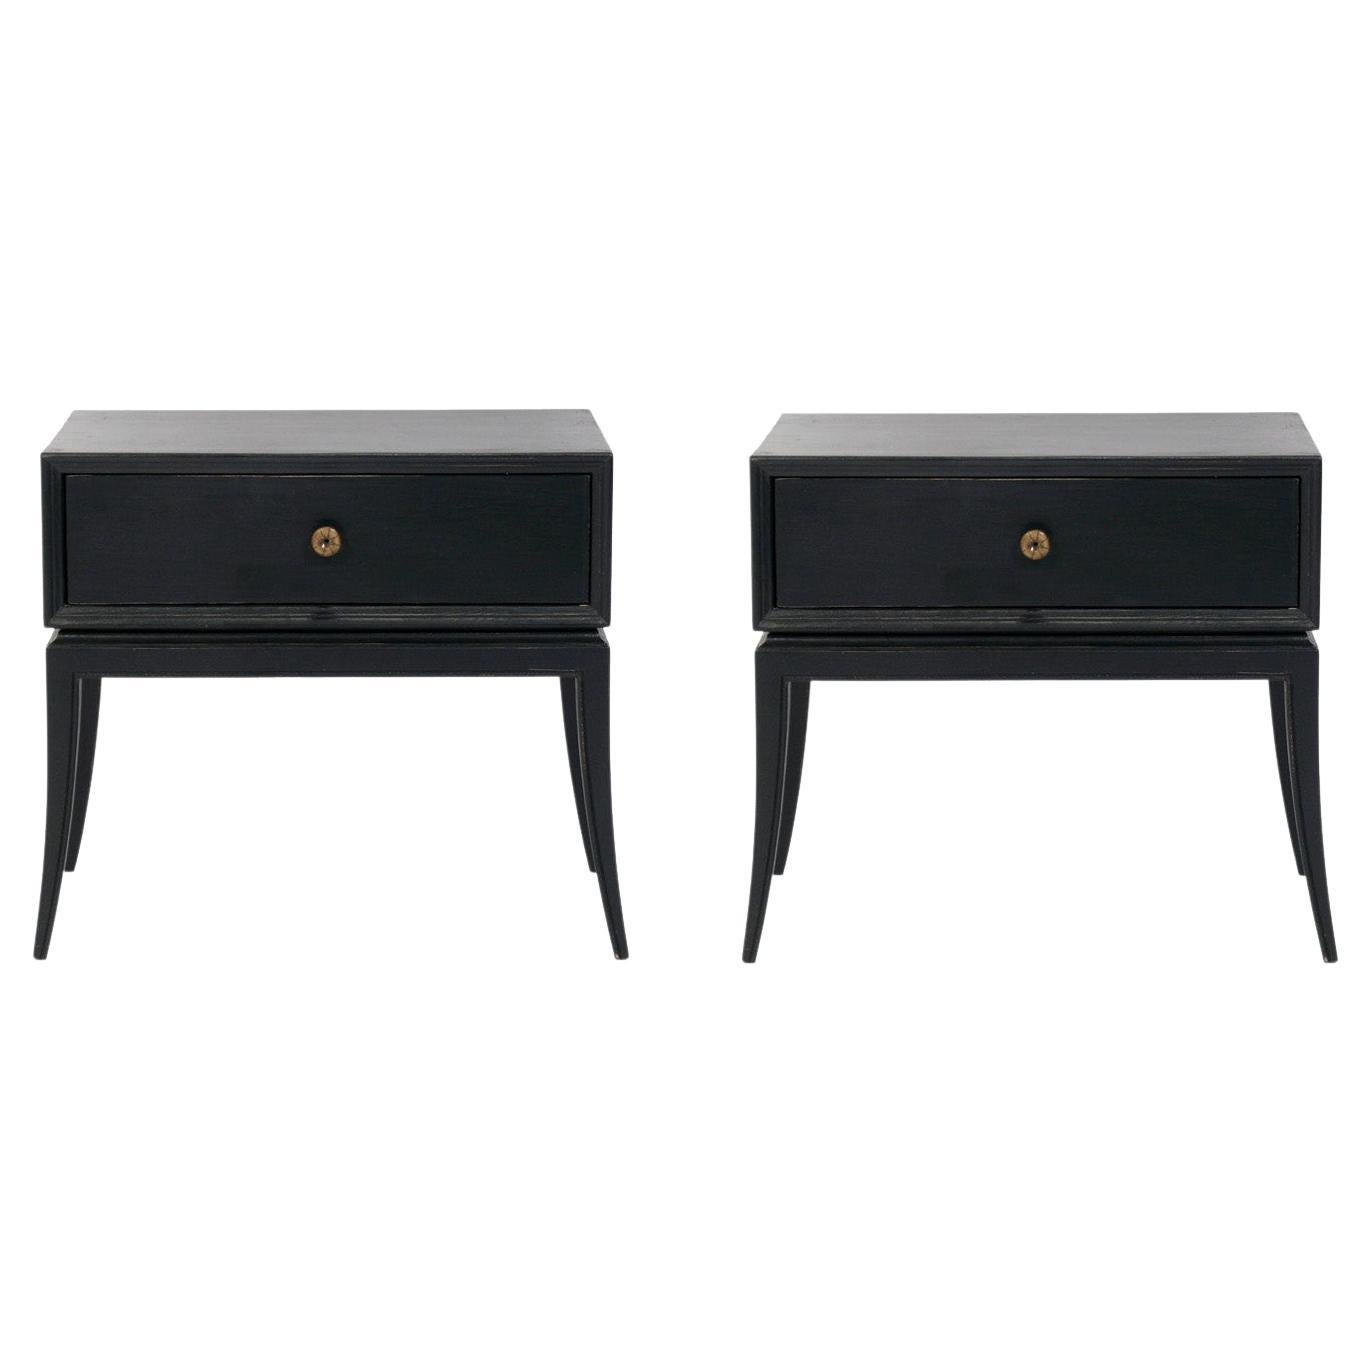 Tommi Parzinger Night Stands - Refinished in Your Color Choice